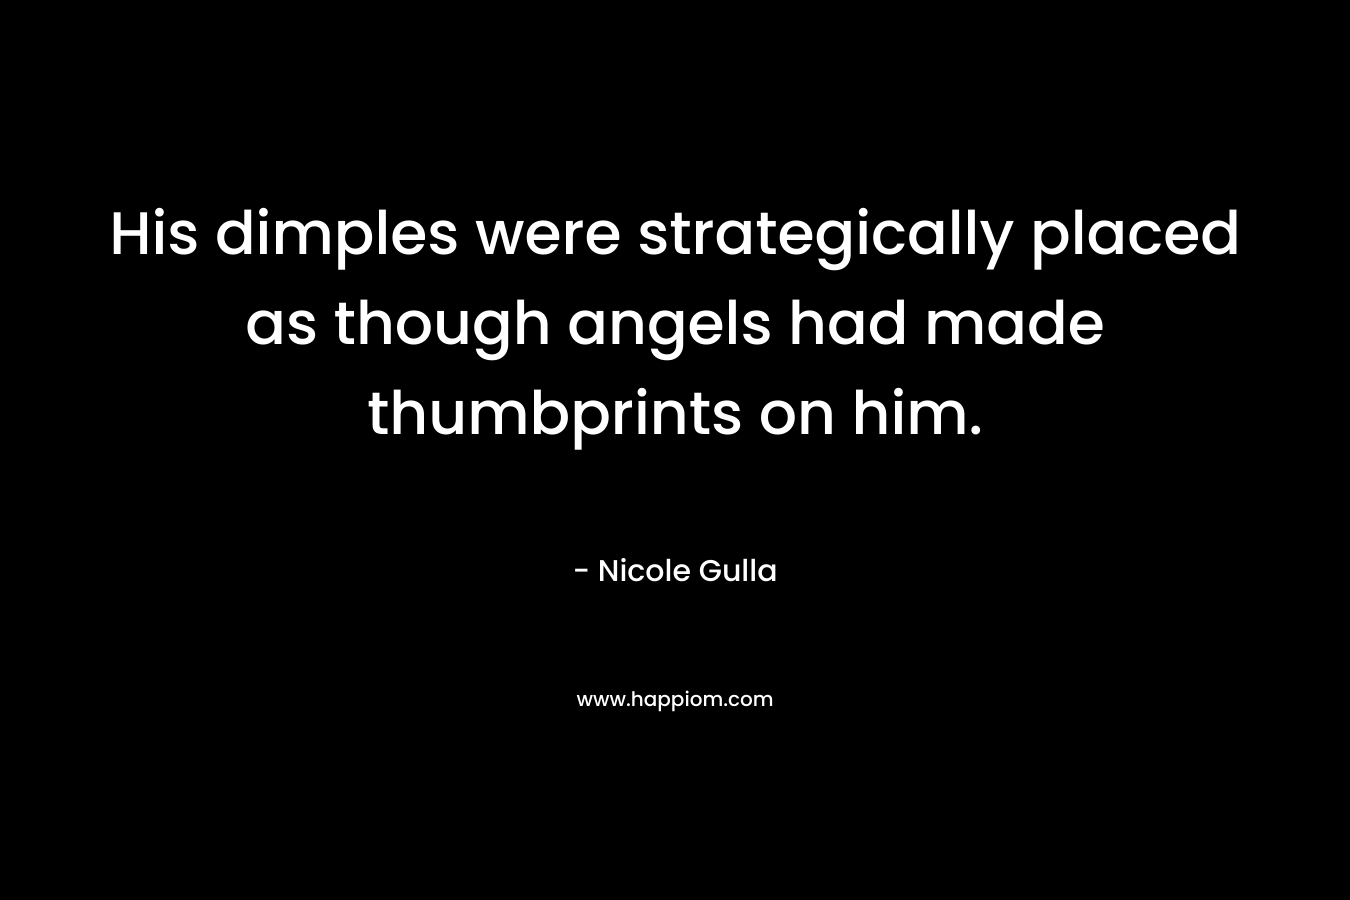 His dimples were strategically placed as though angels had made thumbprints on him.